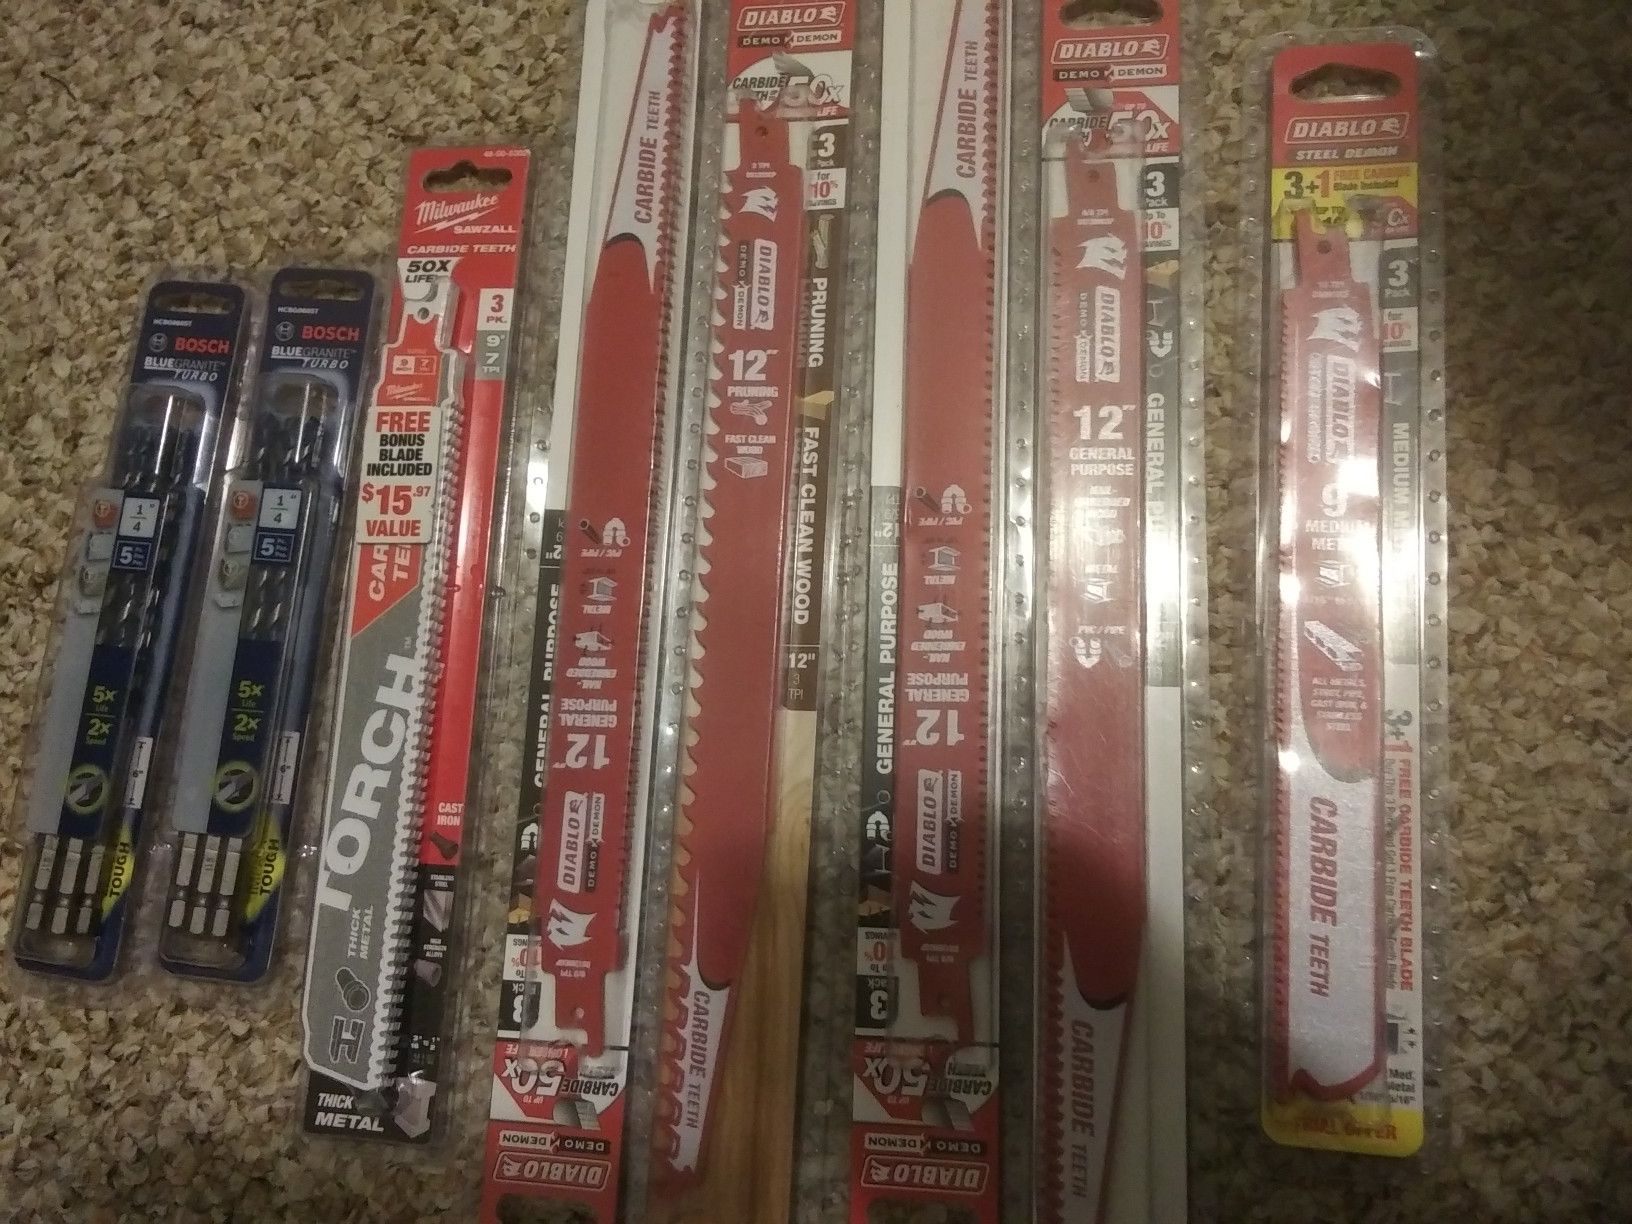 6 new packs Diablo sawzall blades and 2 packs of Bosch drill bits